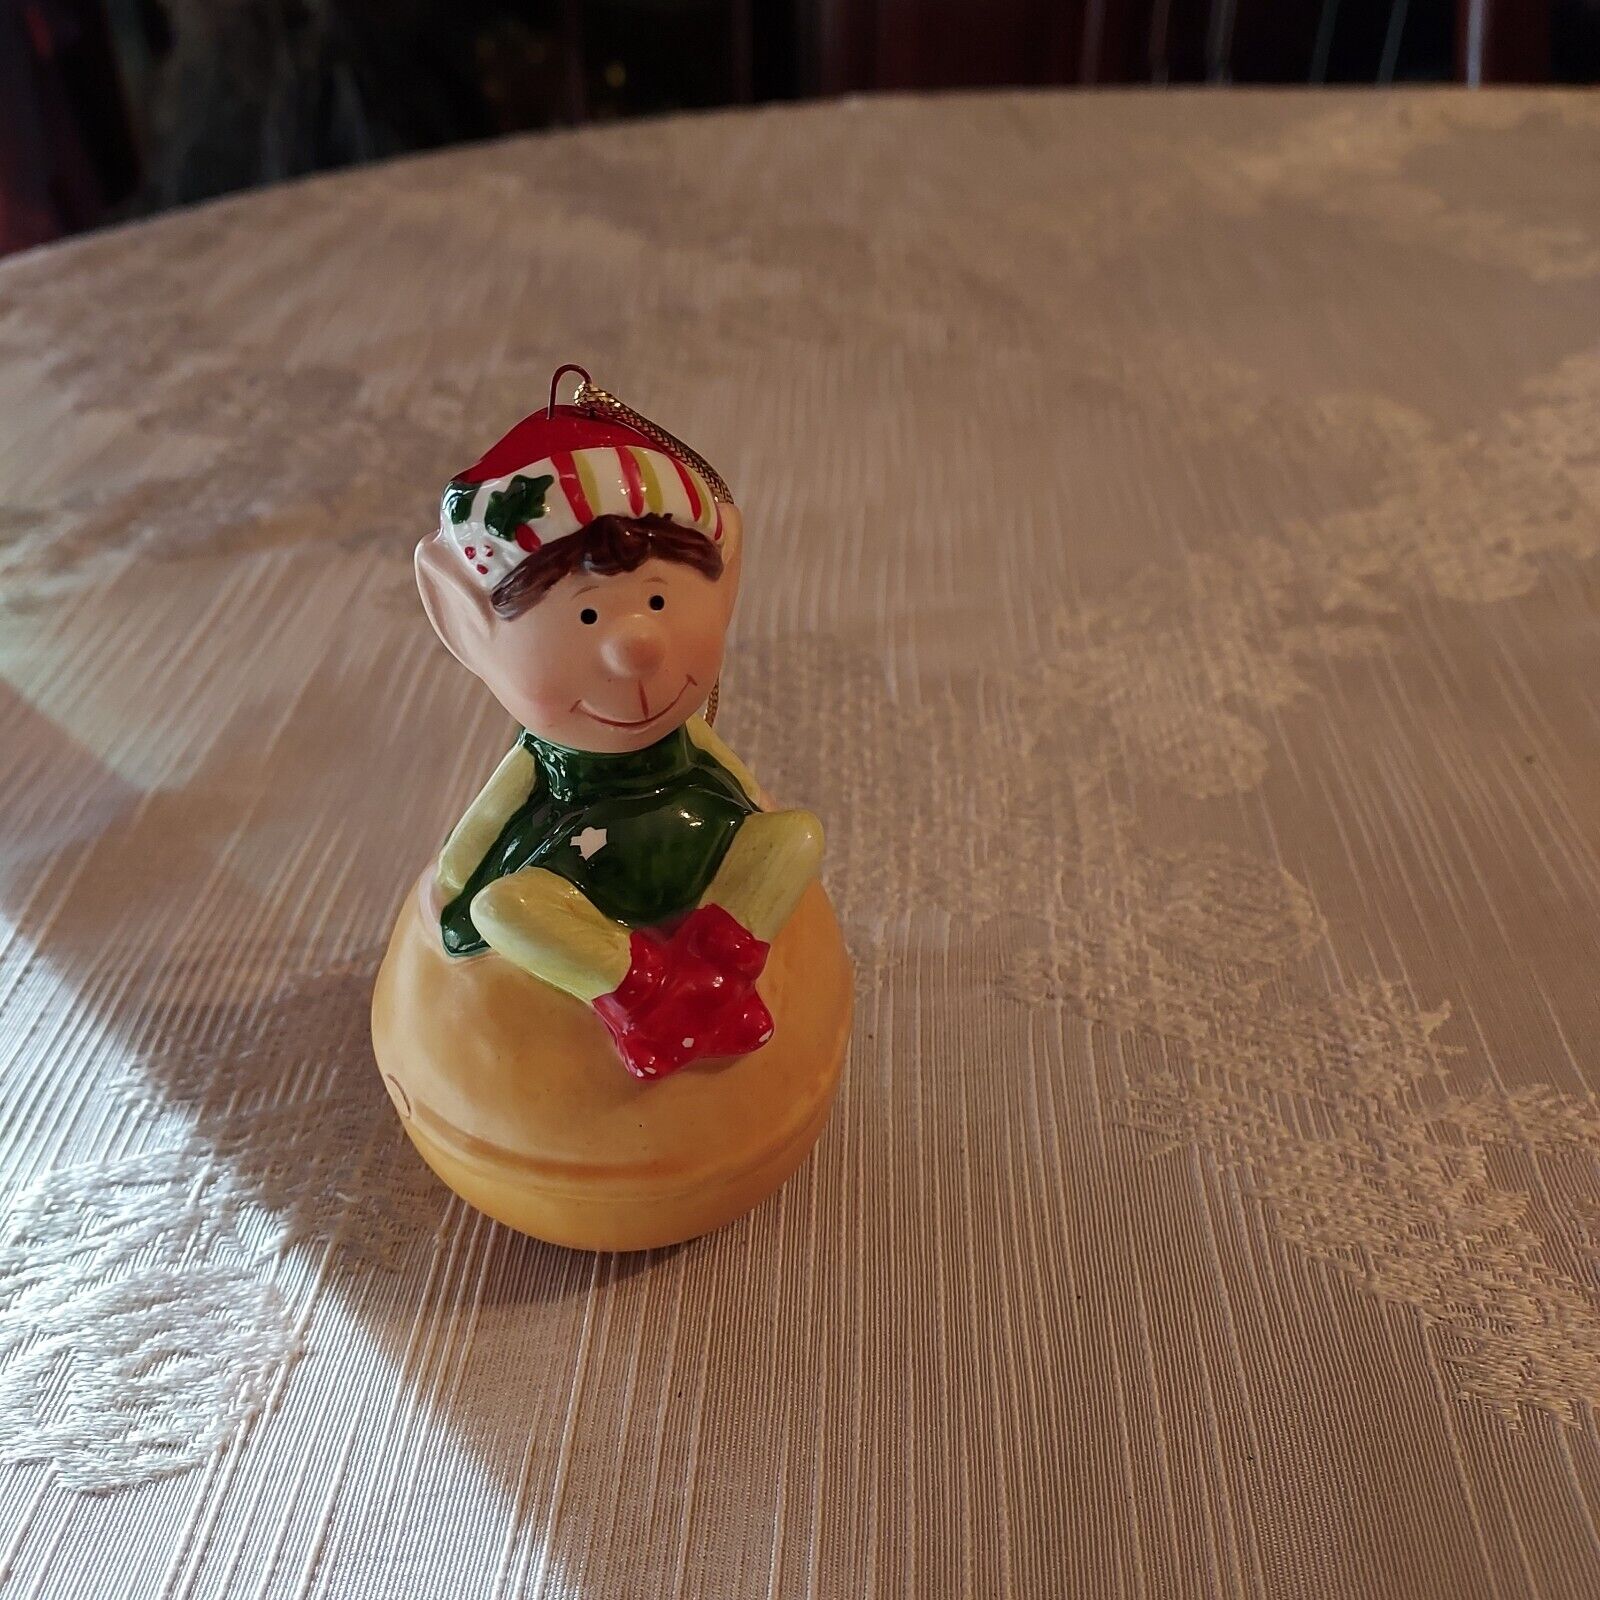 Vintage 1982 Himself the Elf by WWA, Inc. Made in Taiwan Christmas Ornament